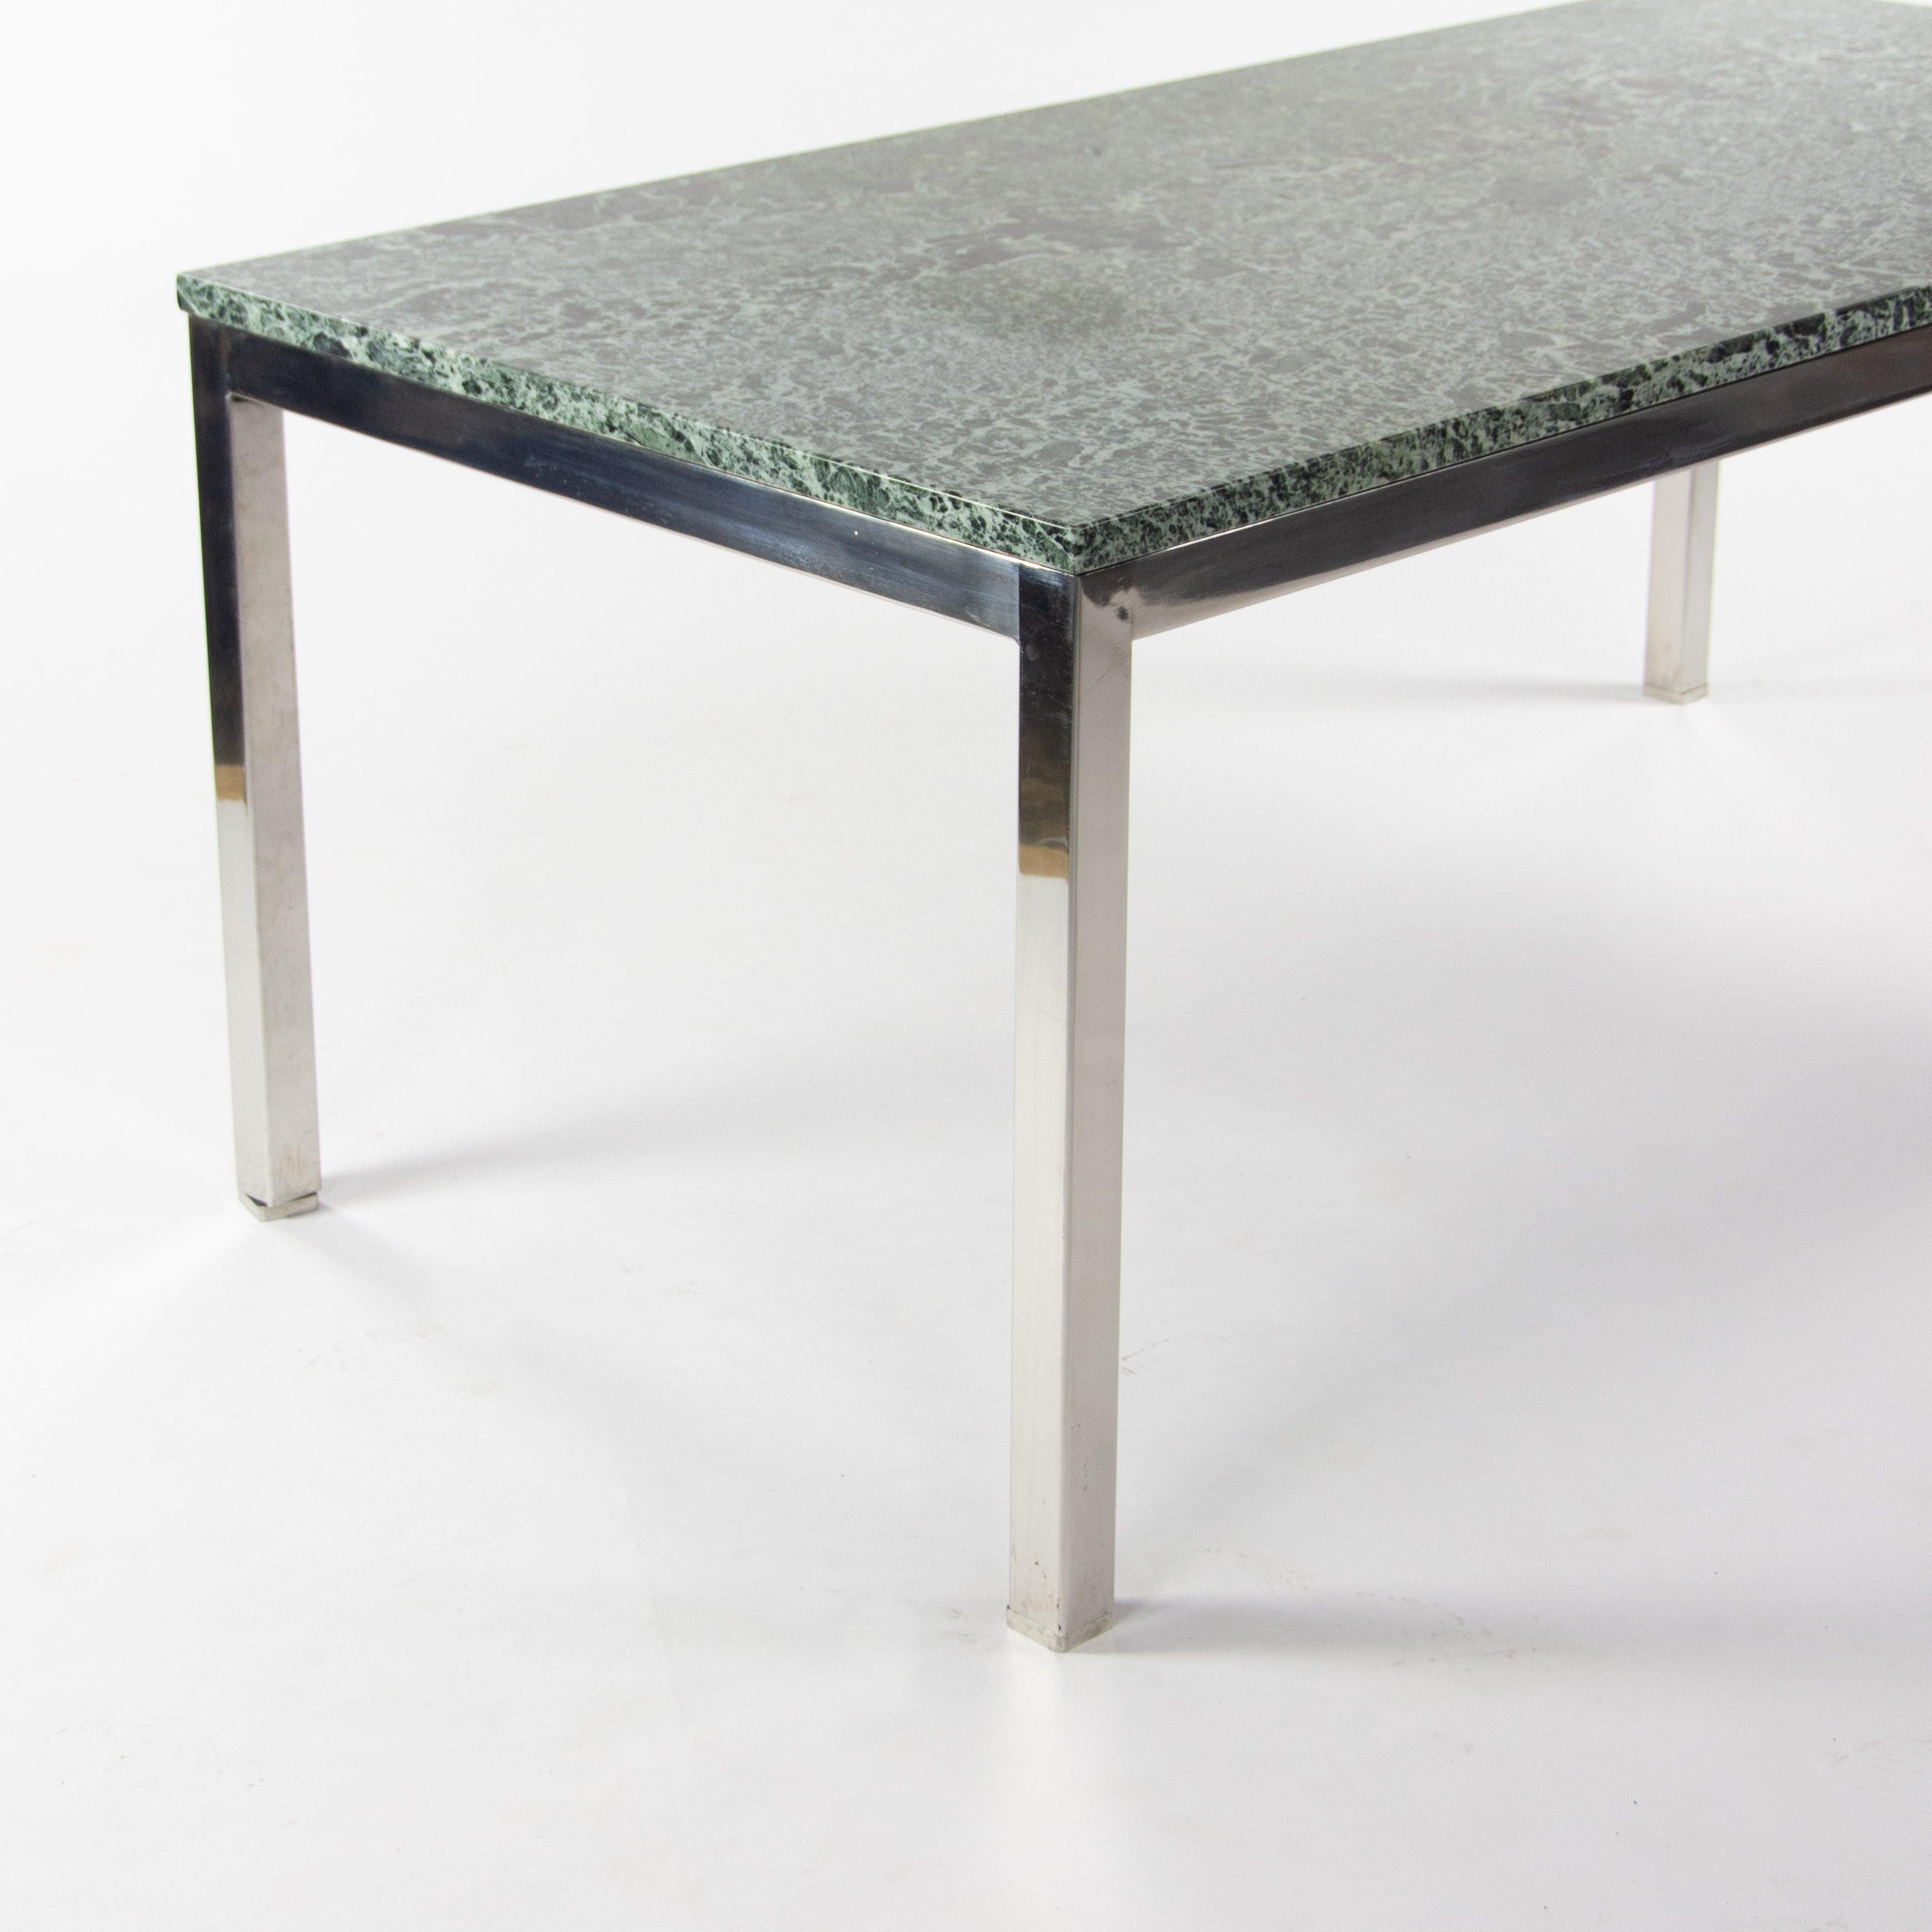 Modern Green Granite Cumberland Meeting Dining Conference Tables Steel Base For Sale